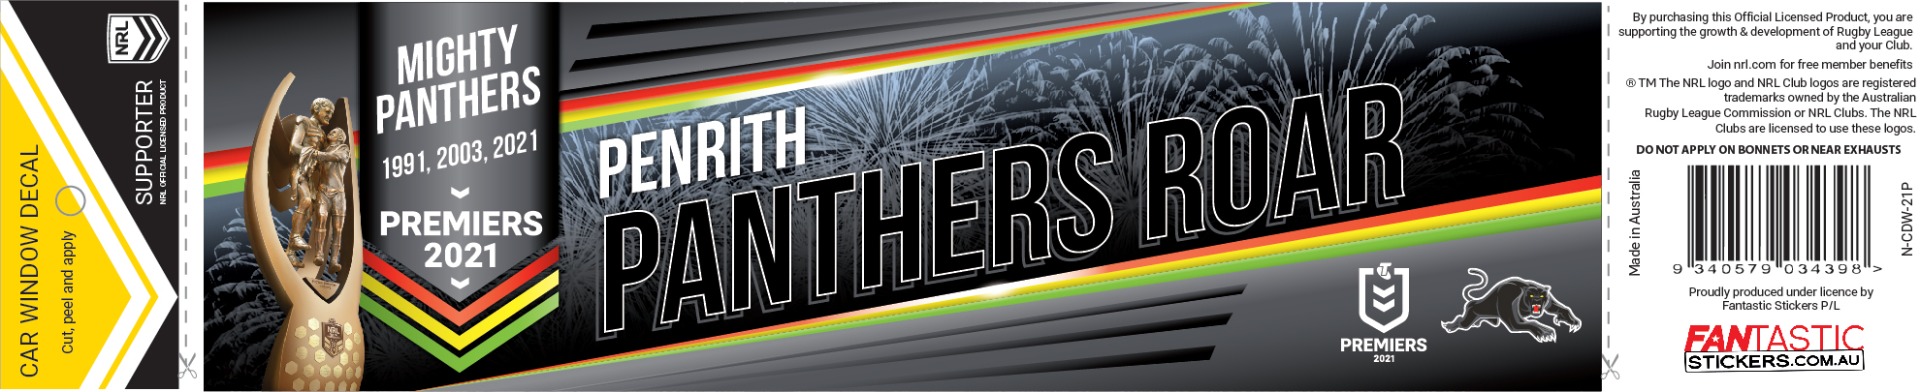 PRE ORDER - Penrith Panthers 2021 NRL Premiers Bumper Sticker Car Window Decal